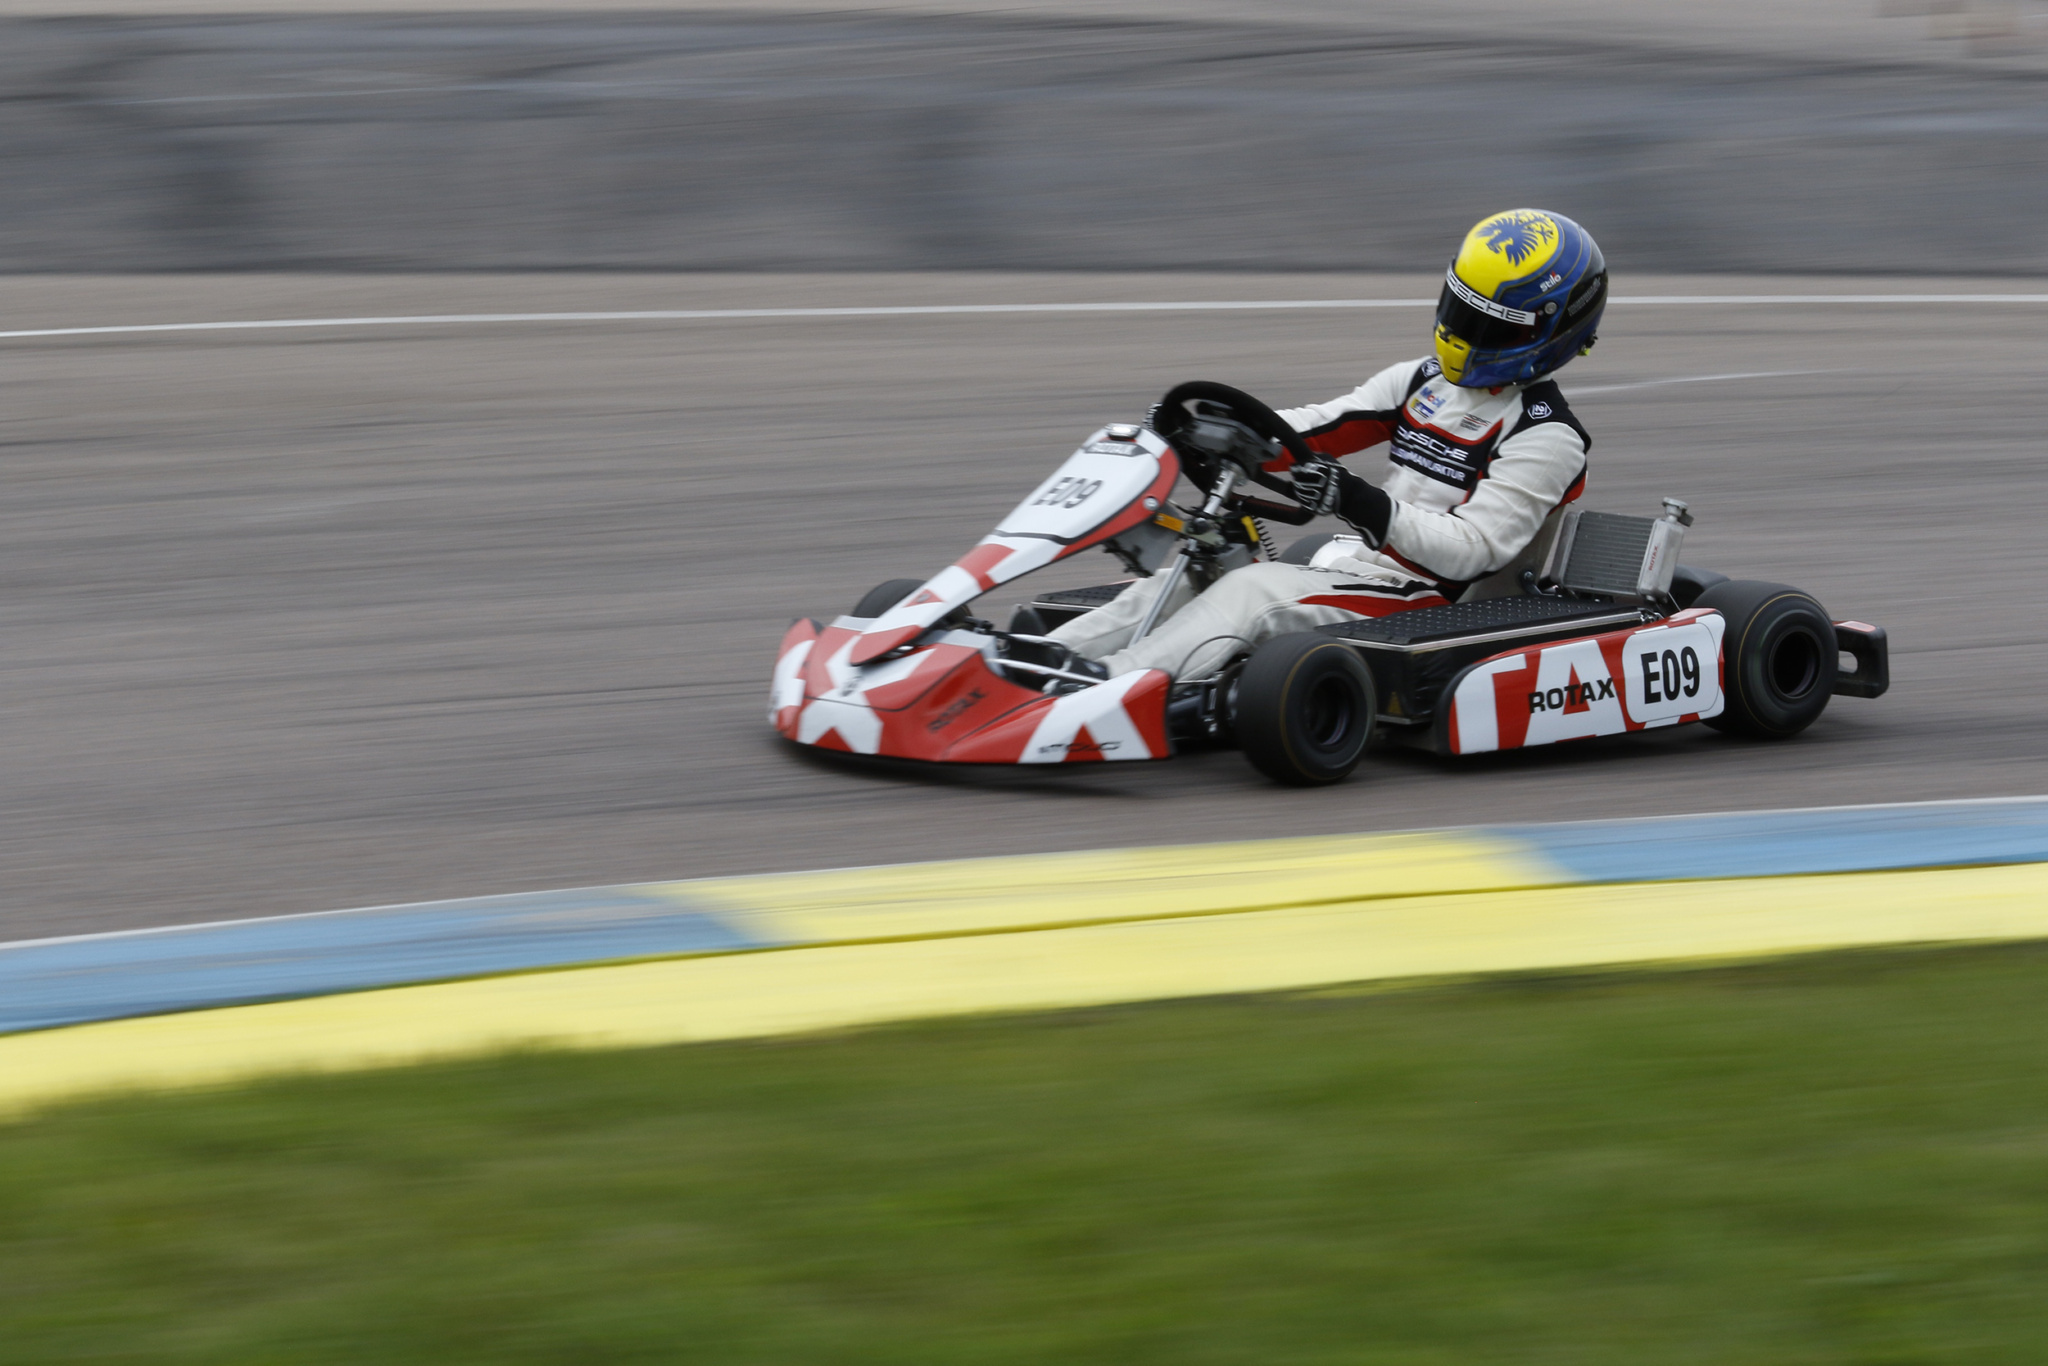 Prince Carl Philipp on the Race track with the Rotax Project E20